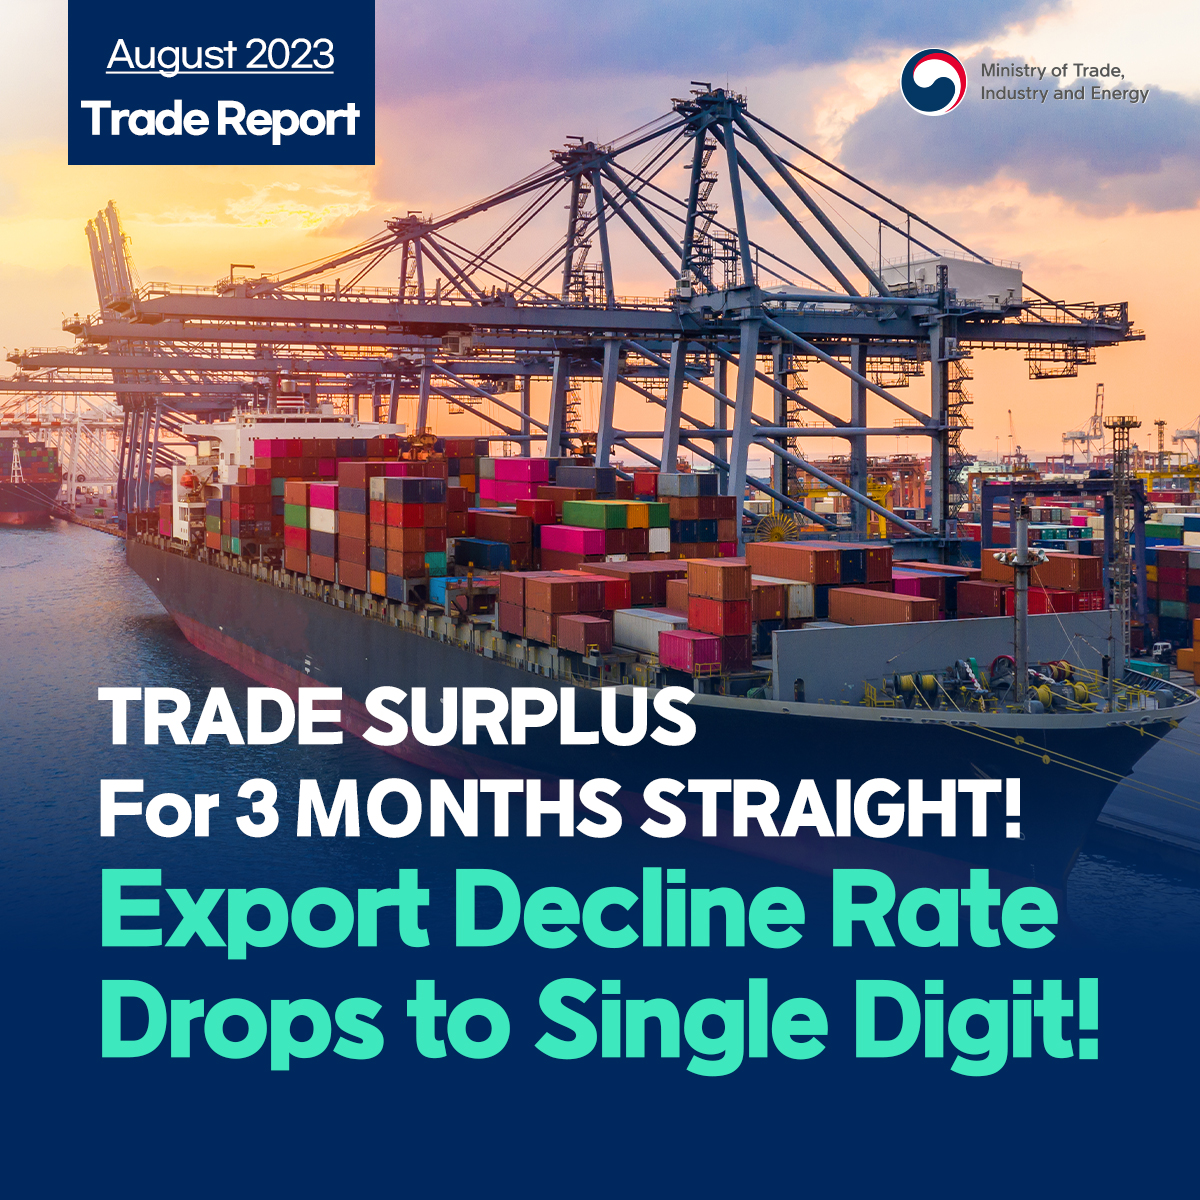 Korea records trade surplus for 3rd consecutive month Image 0